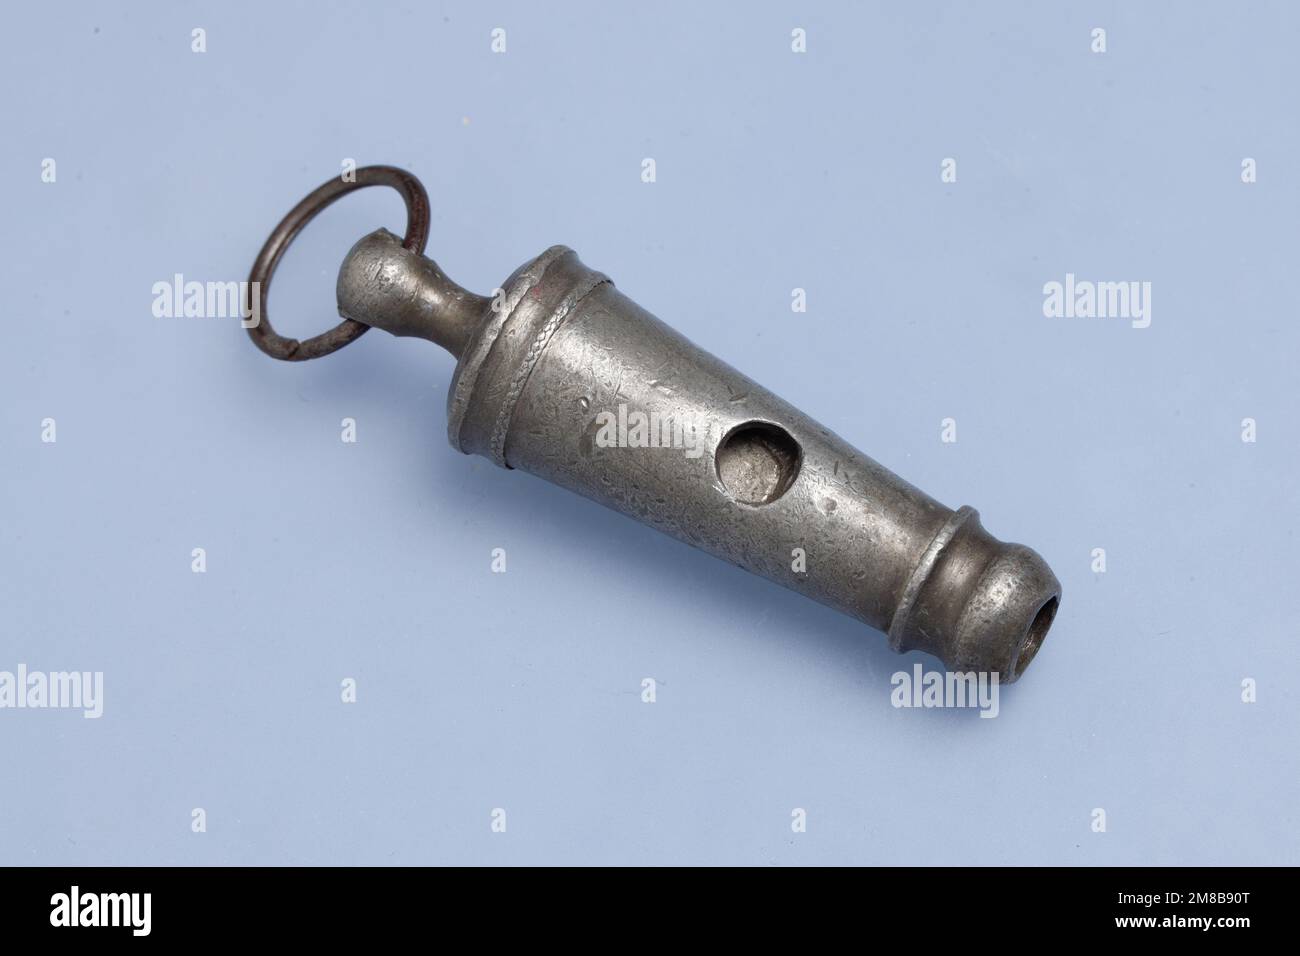 Small Victorian Beaufort whistle made of pewter or Britannia metal Stock Photo